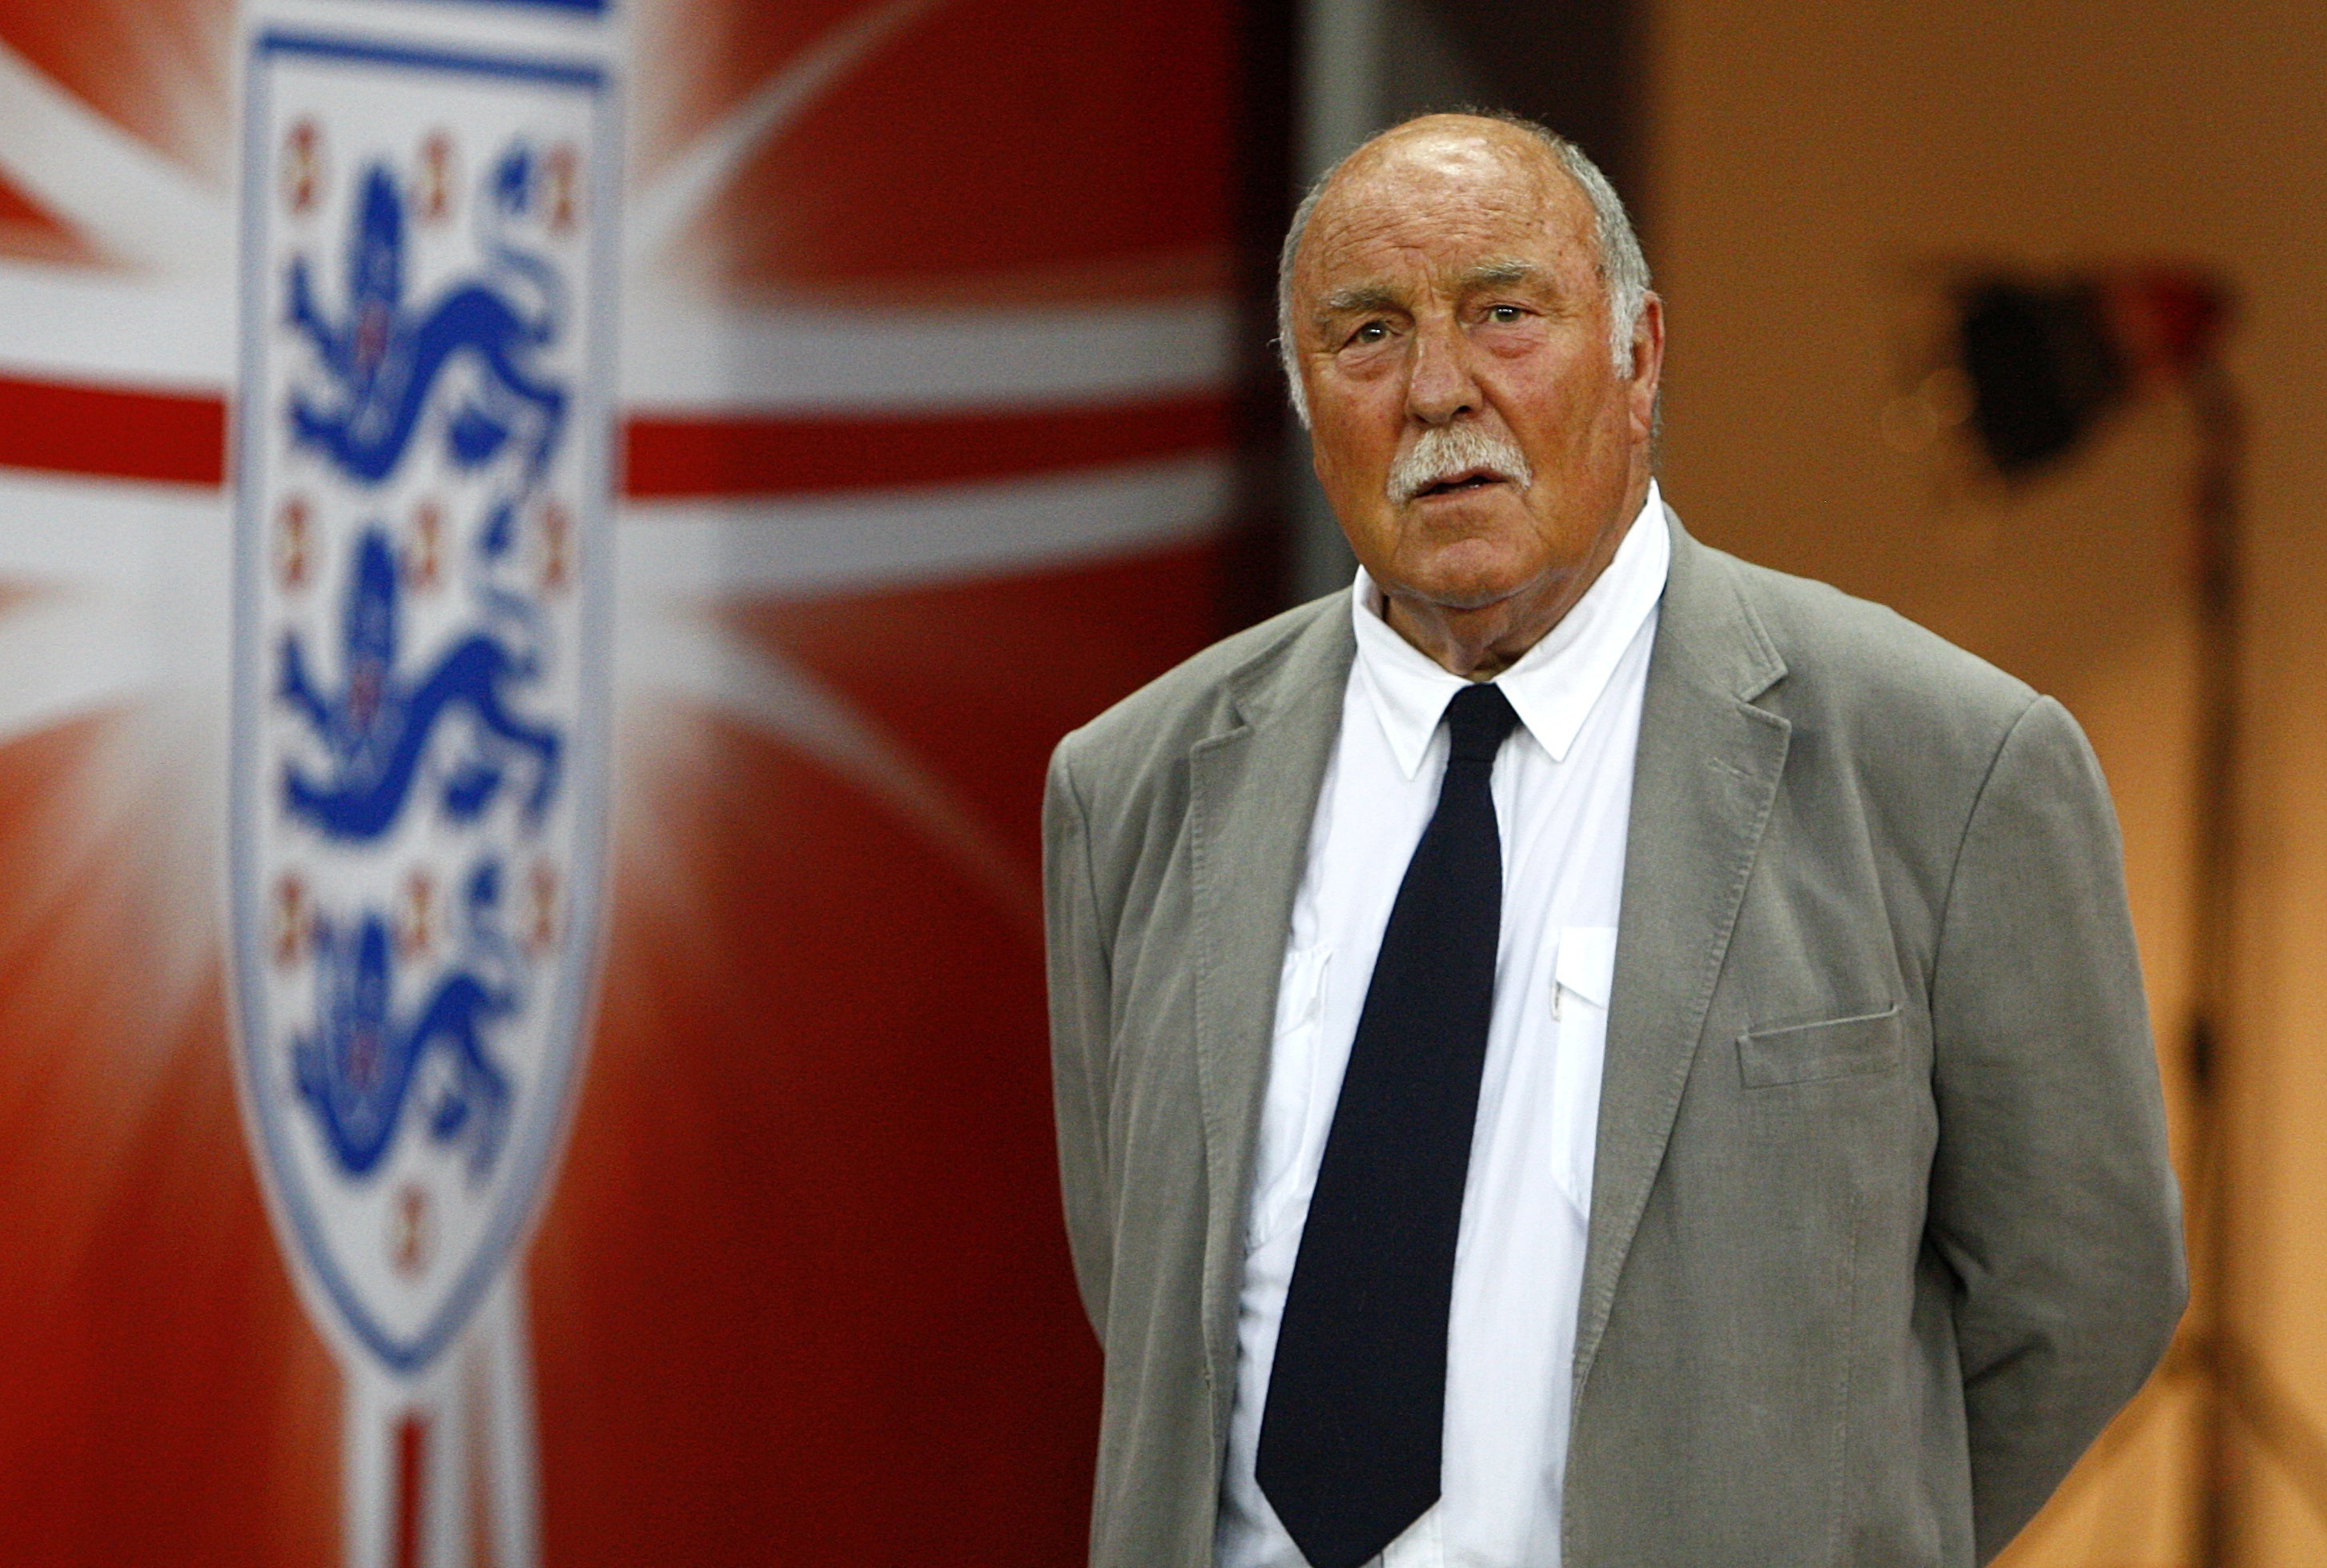 Jimmy Greaves scored 44 goals for England and will be remembered ahead of Tuesday’s game (Sean Dempsey/PA)